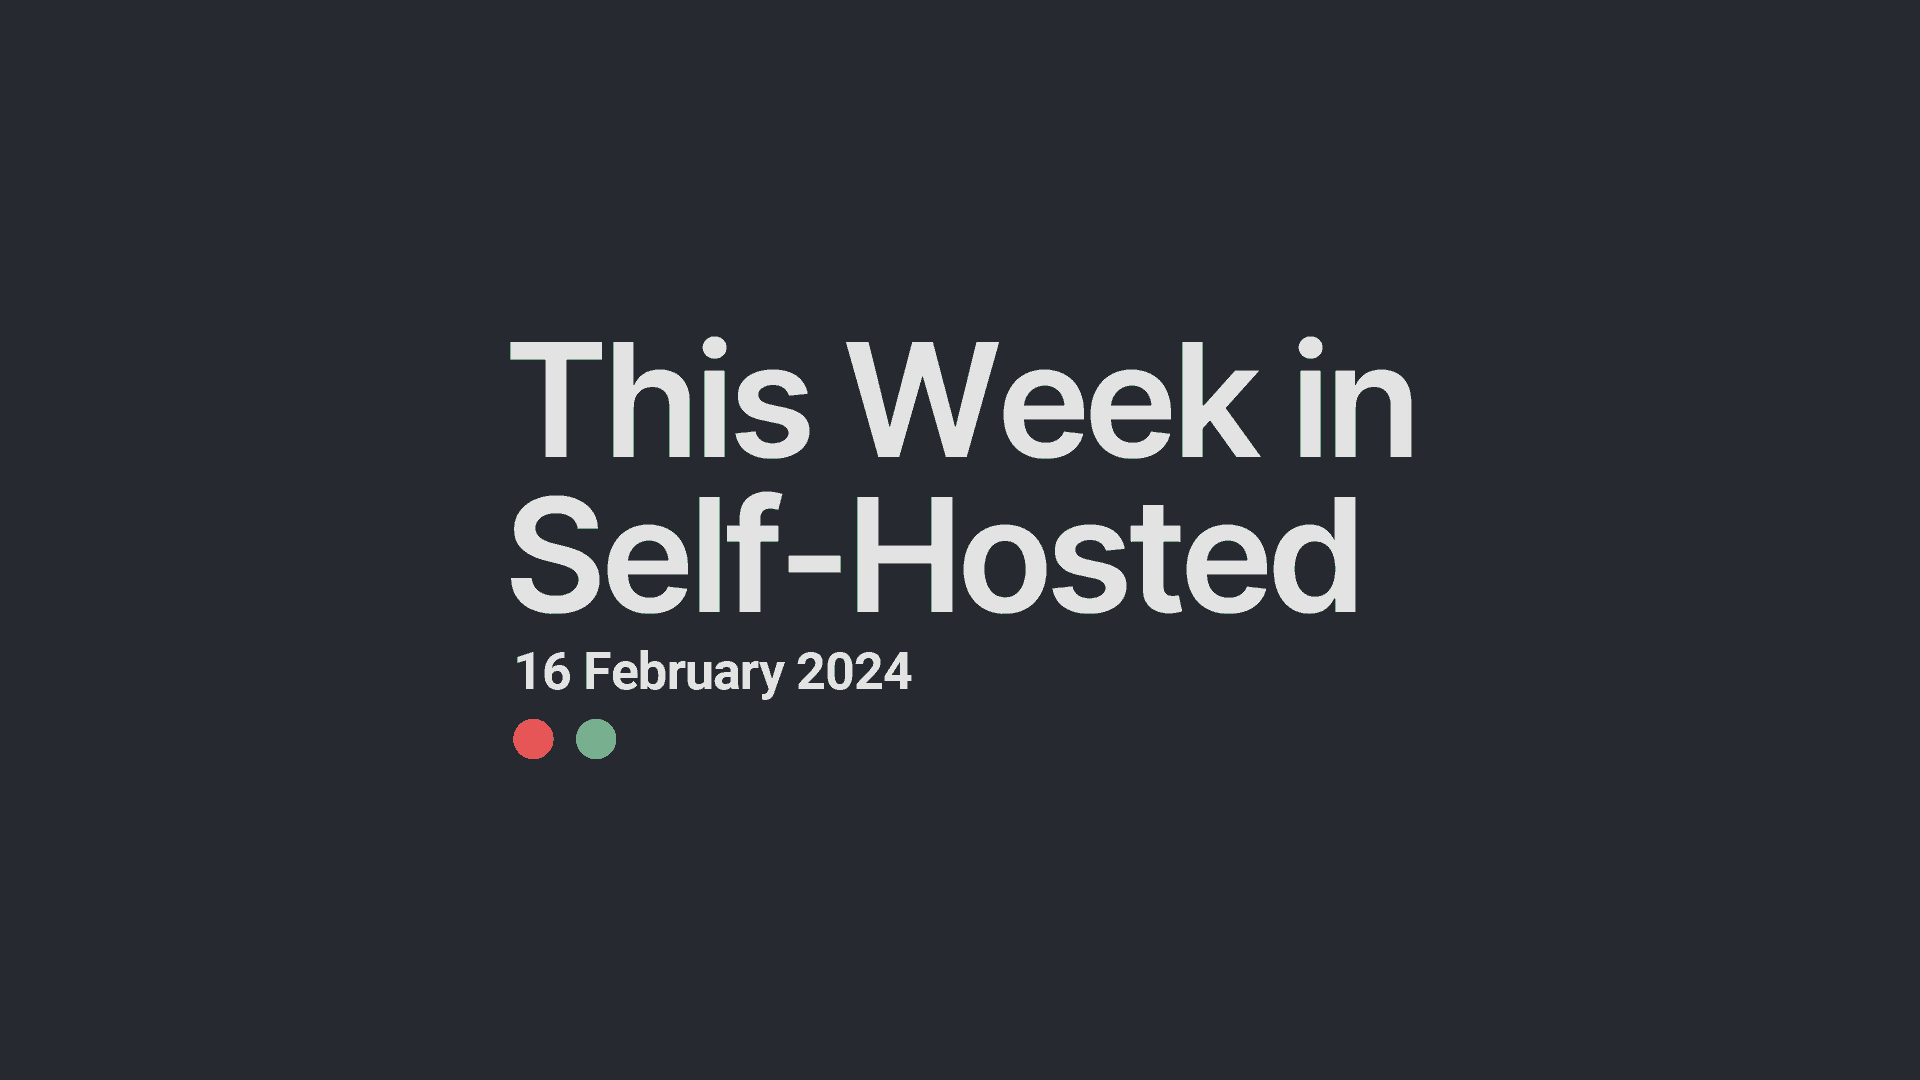 This Week in Self-Hosted (16 February 2024)